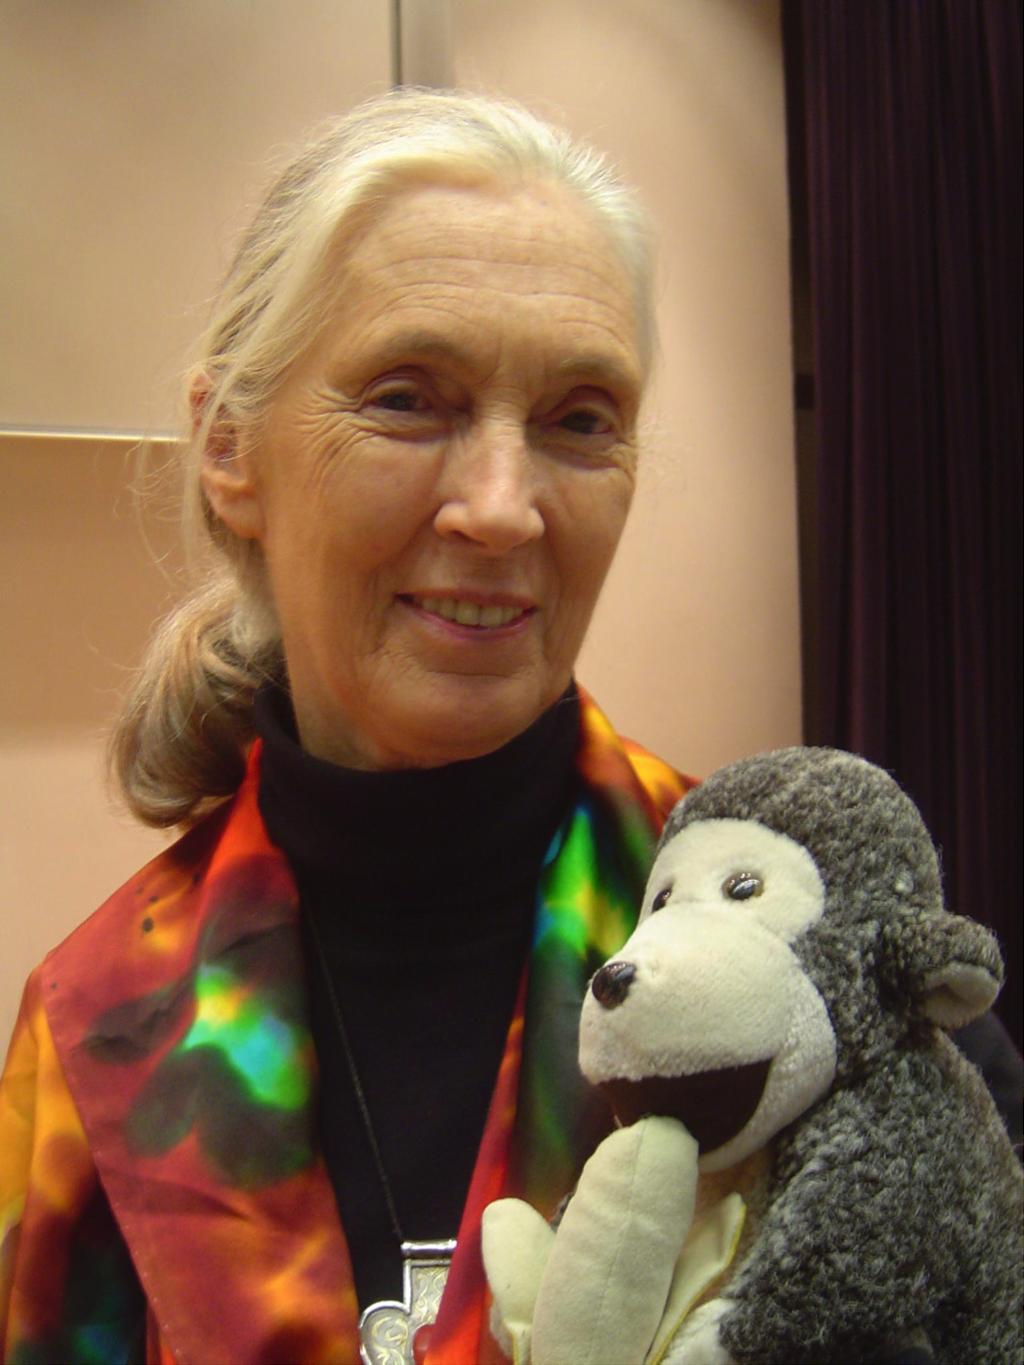 Photo of Jane Goodall by Jeekc (Self-published work by Jeekc) [GFDL (http://www.gnu.org/copyleft/fdl.html), CC-BY-SA-3.